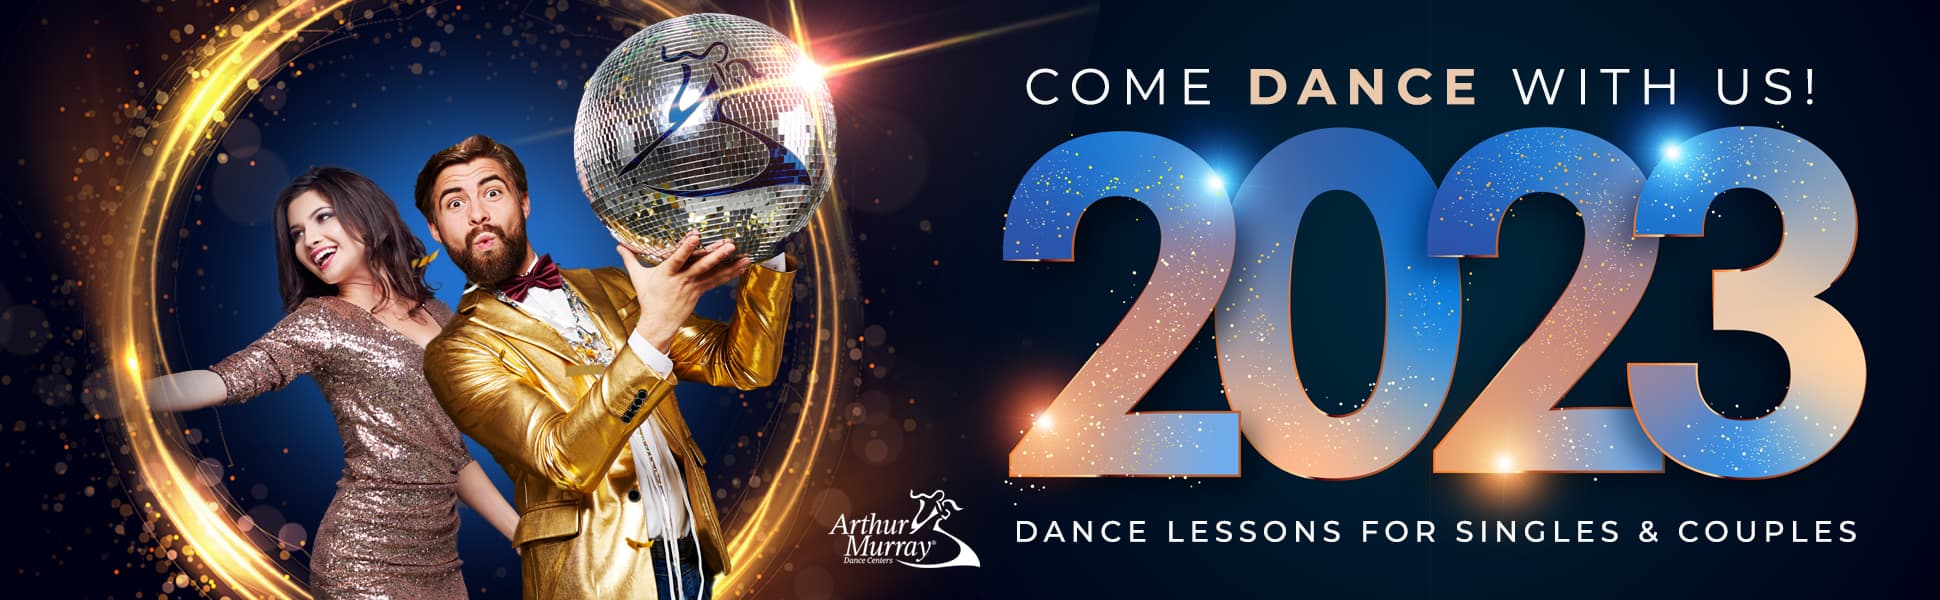 Come dance with us in 2023!